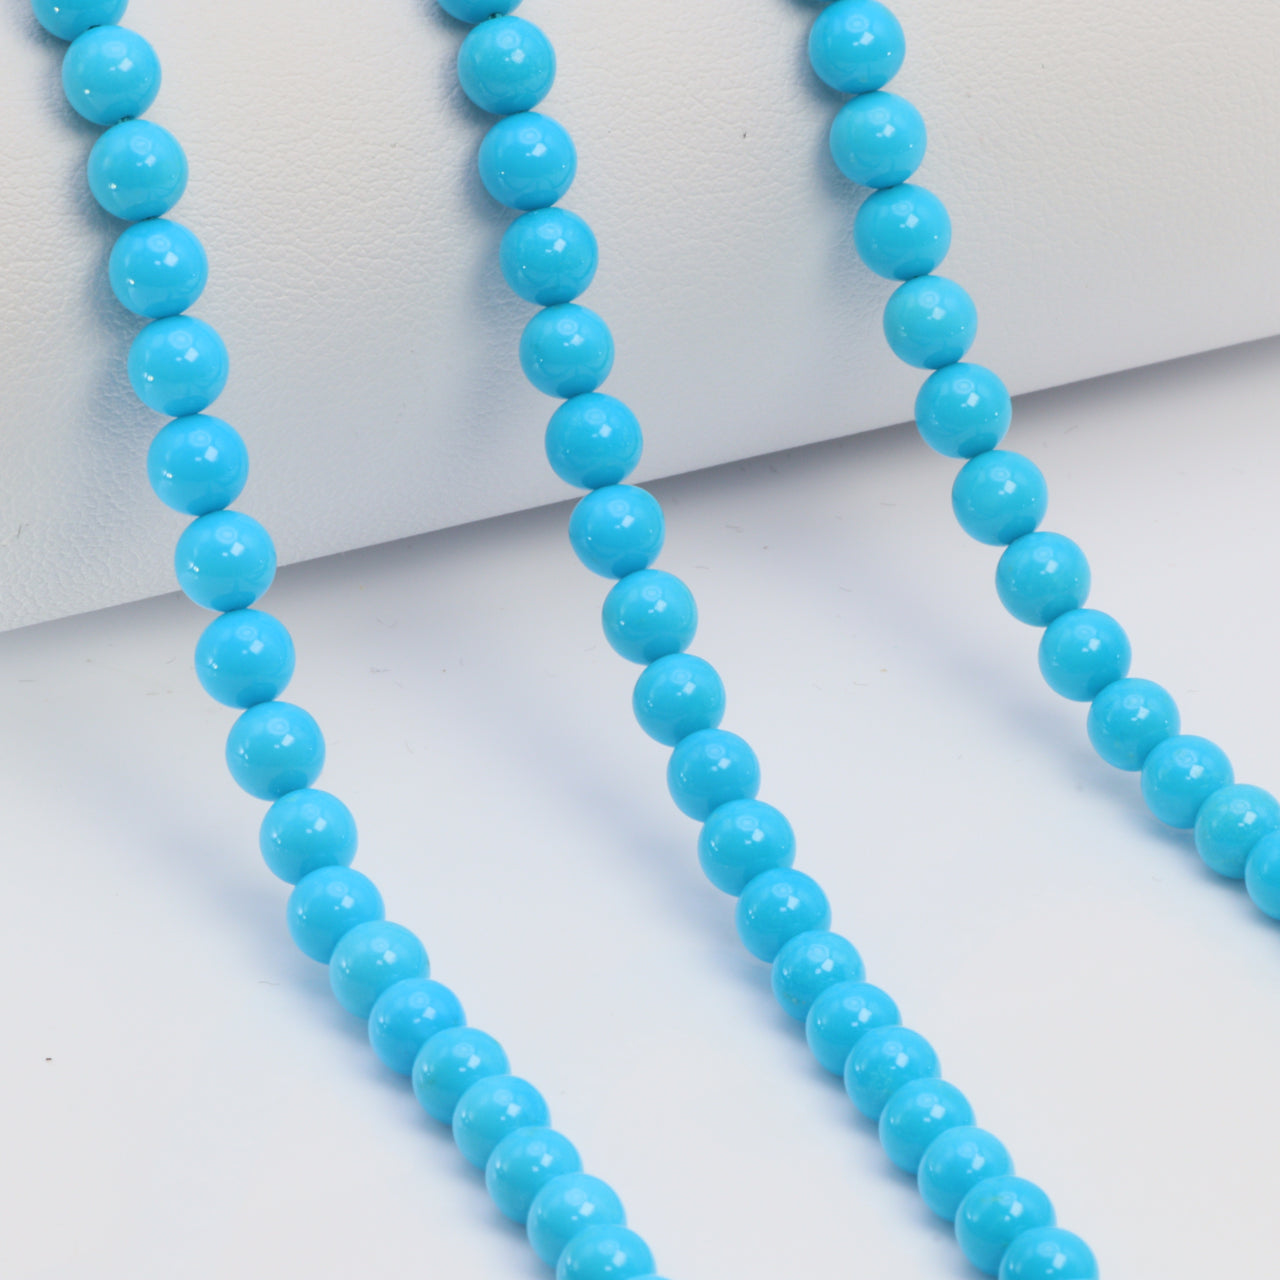 Sleeping Beauty Turquoise 5mm Smooth Rounds